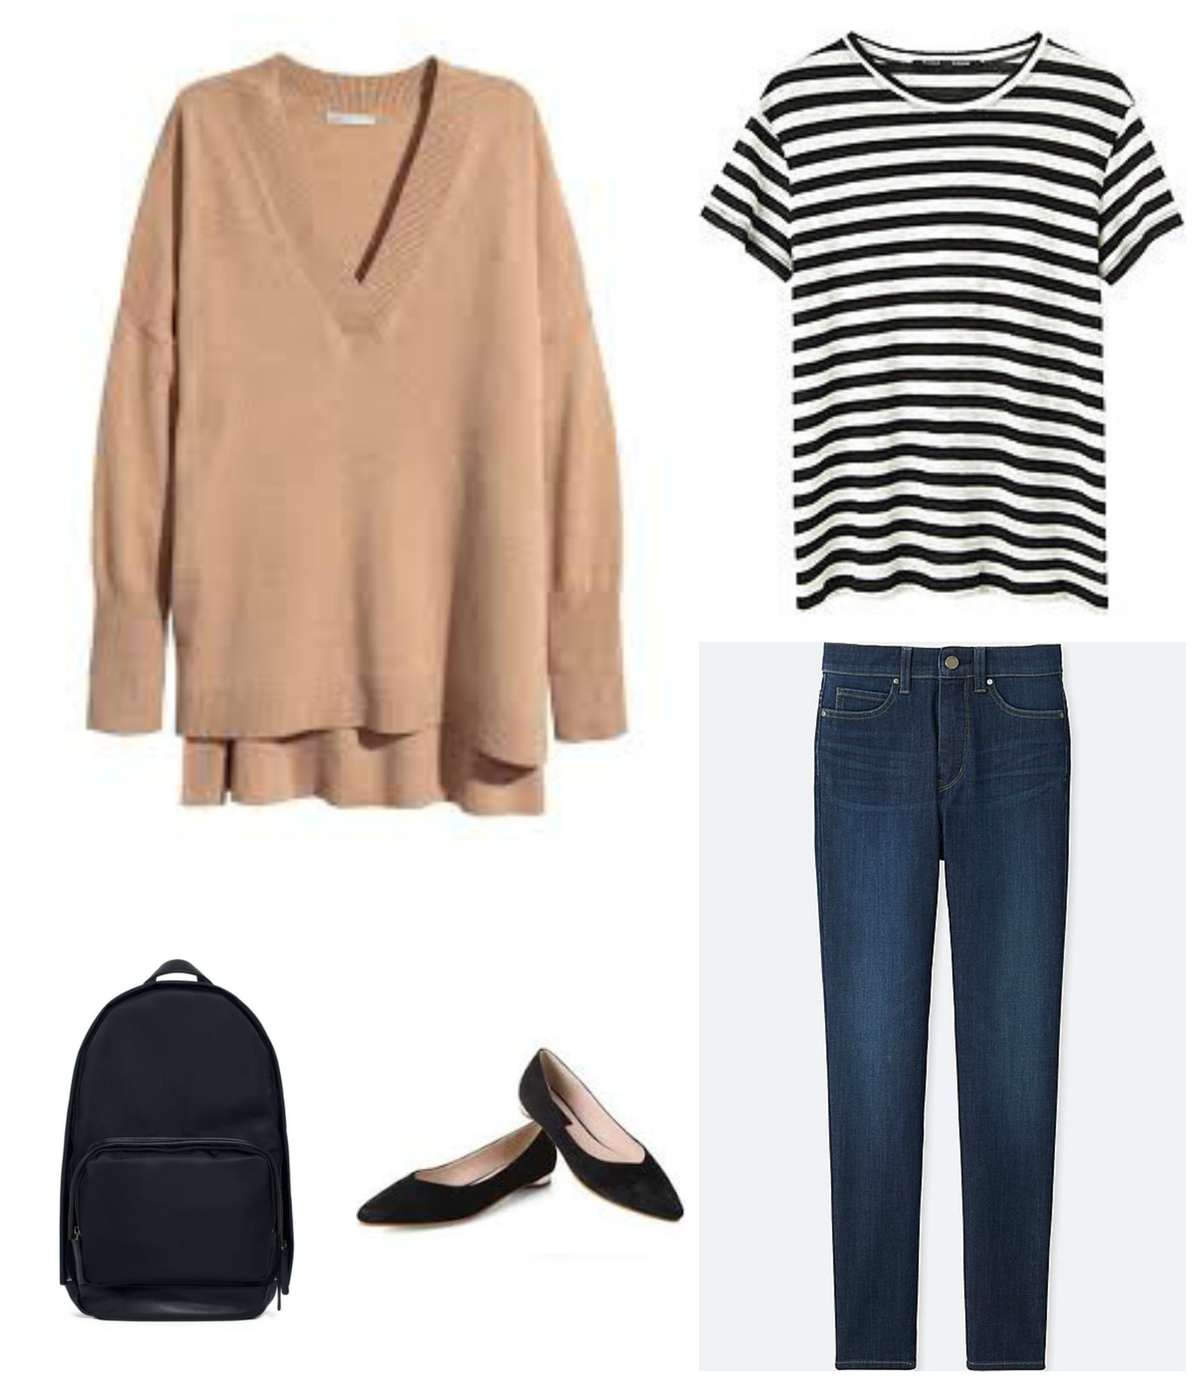 Camel oversized v-neck sweater with a black and white striped t-shirt, dark ankle jeans, black pointed toe flats, and a black backpack.